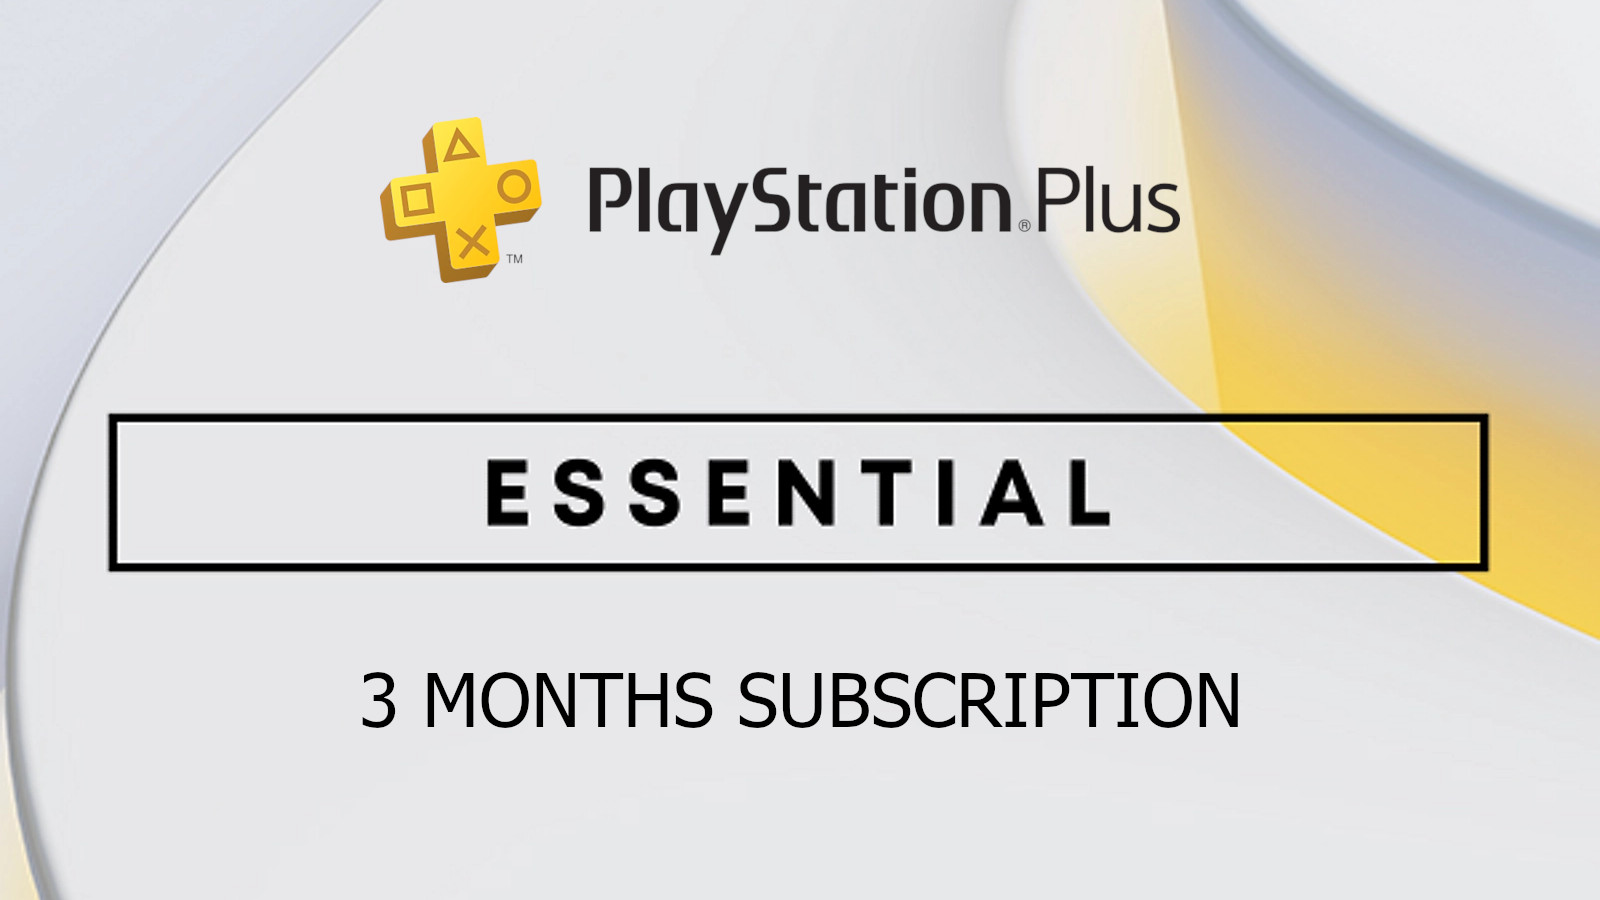 PlayStation Plus Essential 3 Months Subscription US, 32.76$